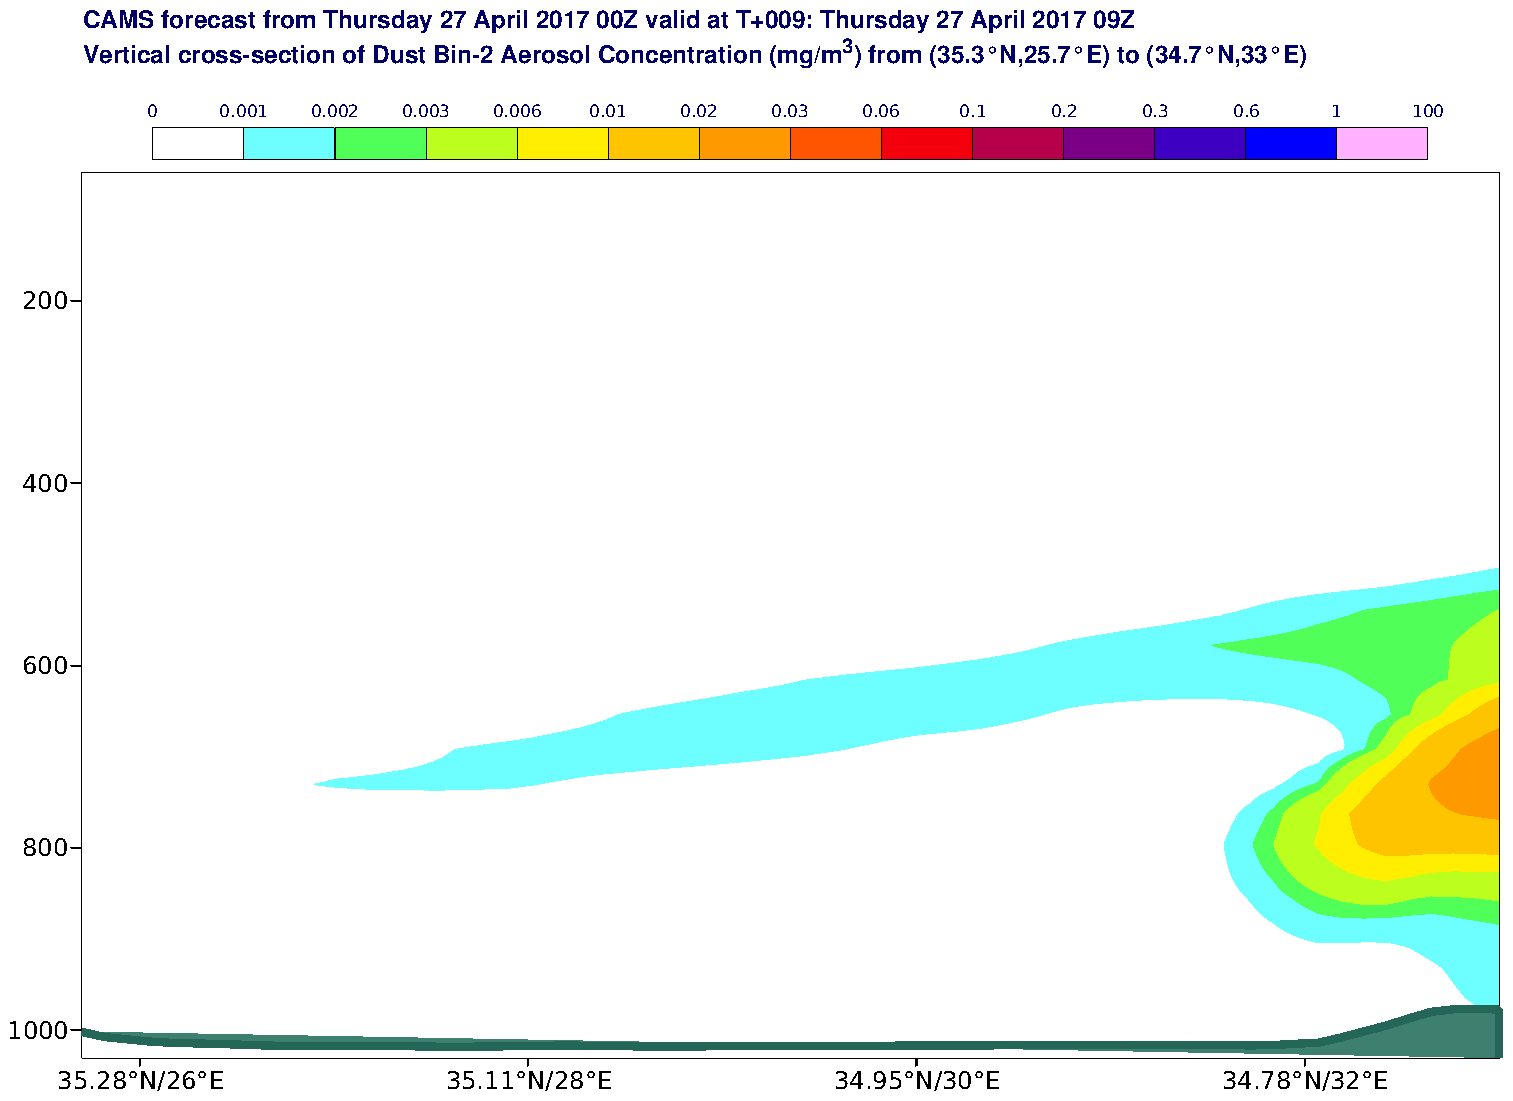 Vertical cross-section of Dust Bin-2 Aerosol Concentration (mg/m3) valid at T9 - 2017-04-27 09:00